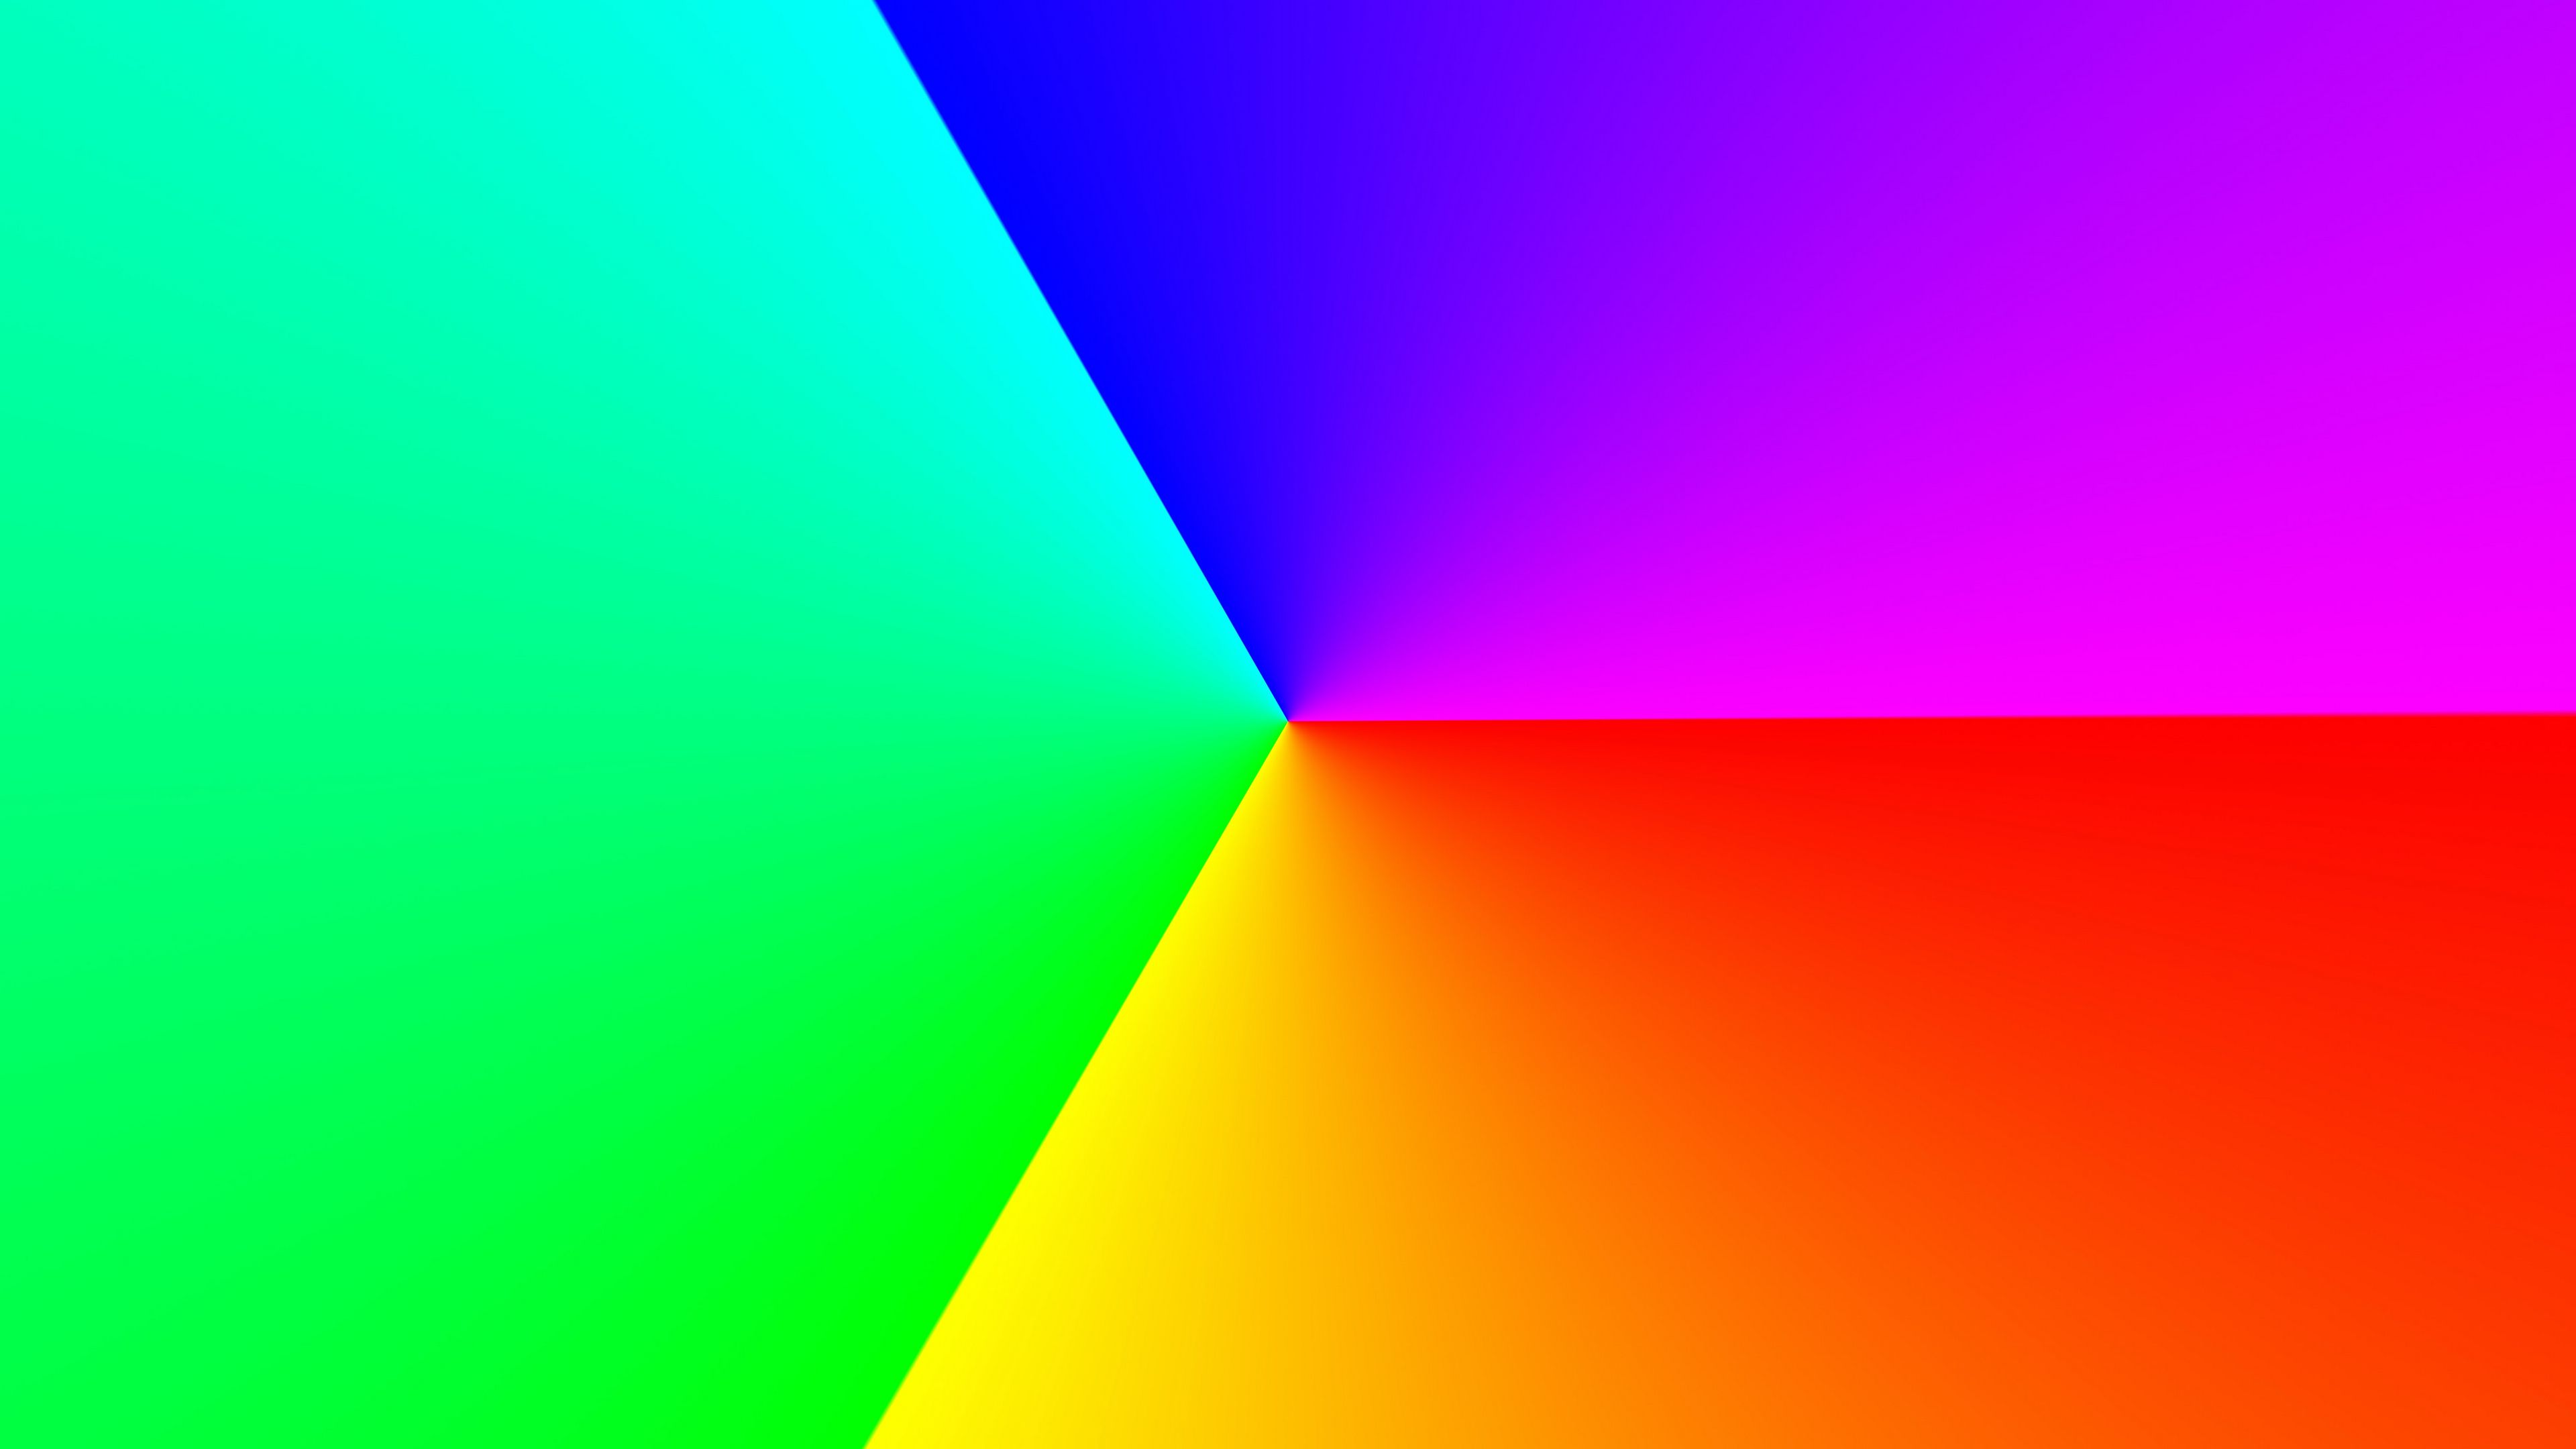 Download wallpaper 3840x2160 rgb shapes edges gradient abstraction  colorful 4k uhd 169 hd background